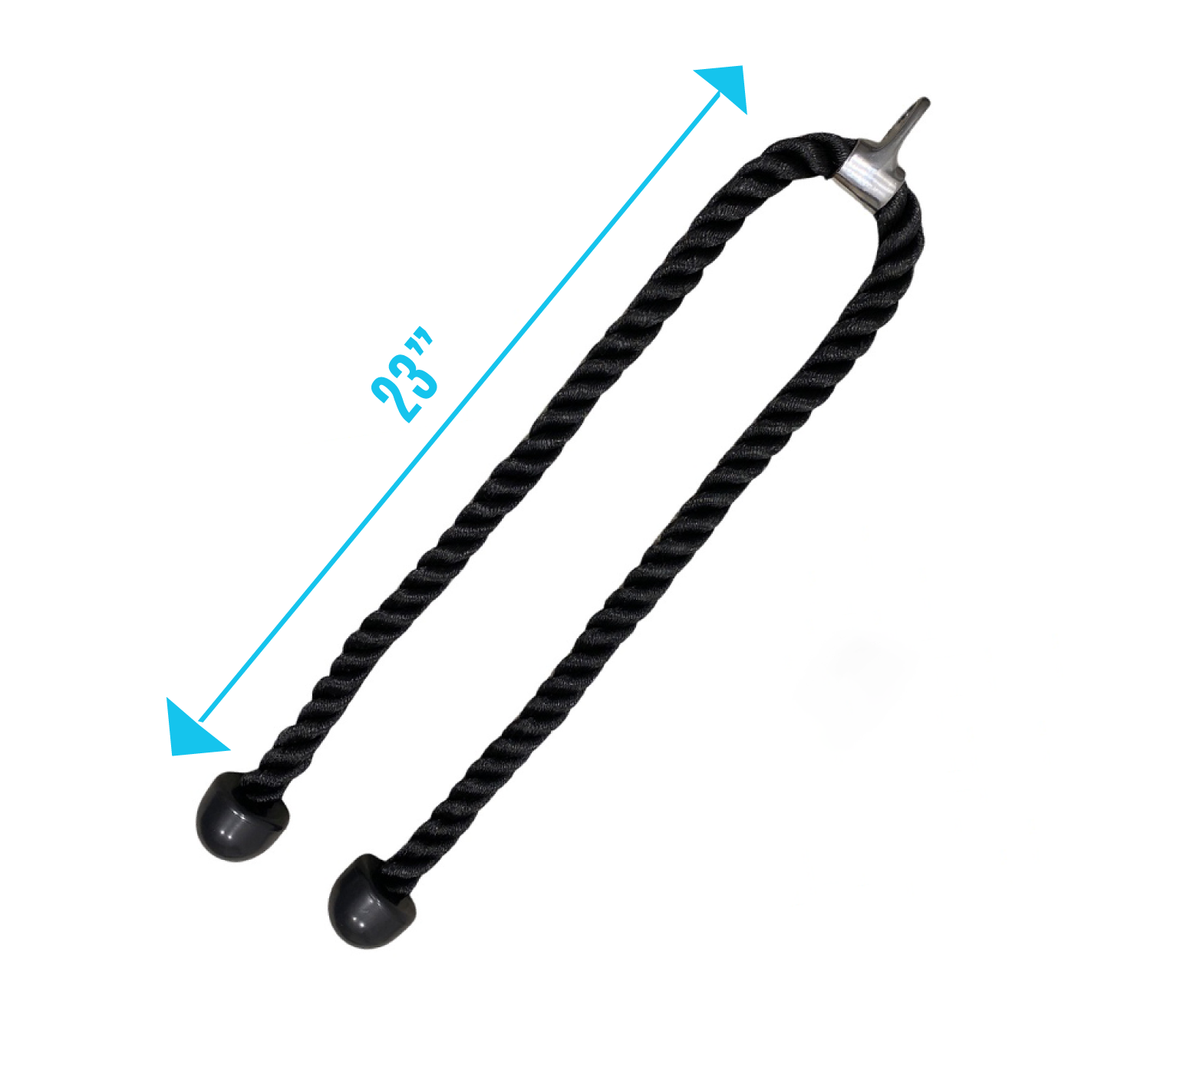 Fitway Equip. Dual Tricep Rope - Long  with view of product length